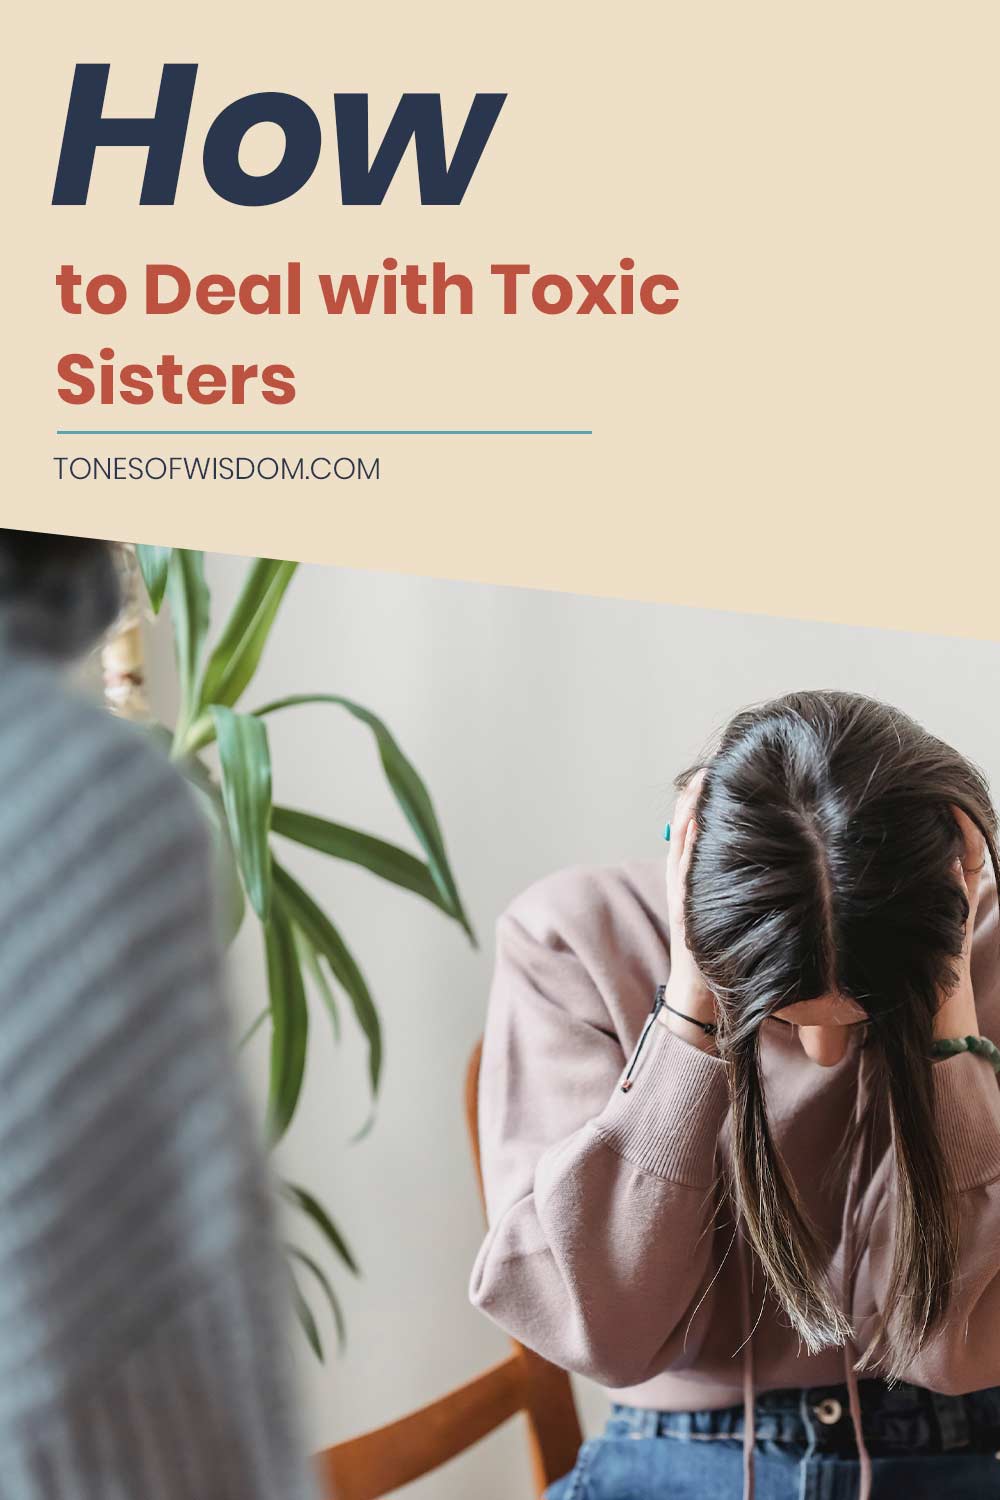 How to Deal with Toxic Sisters